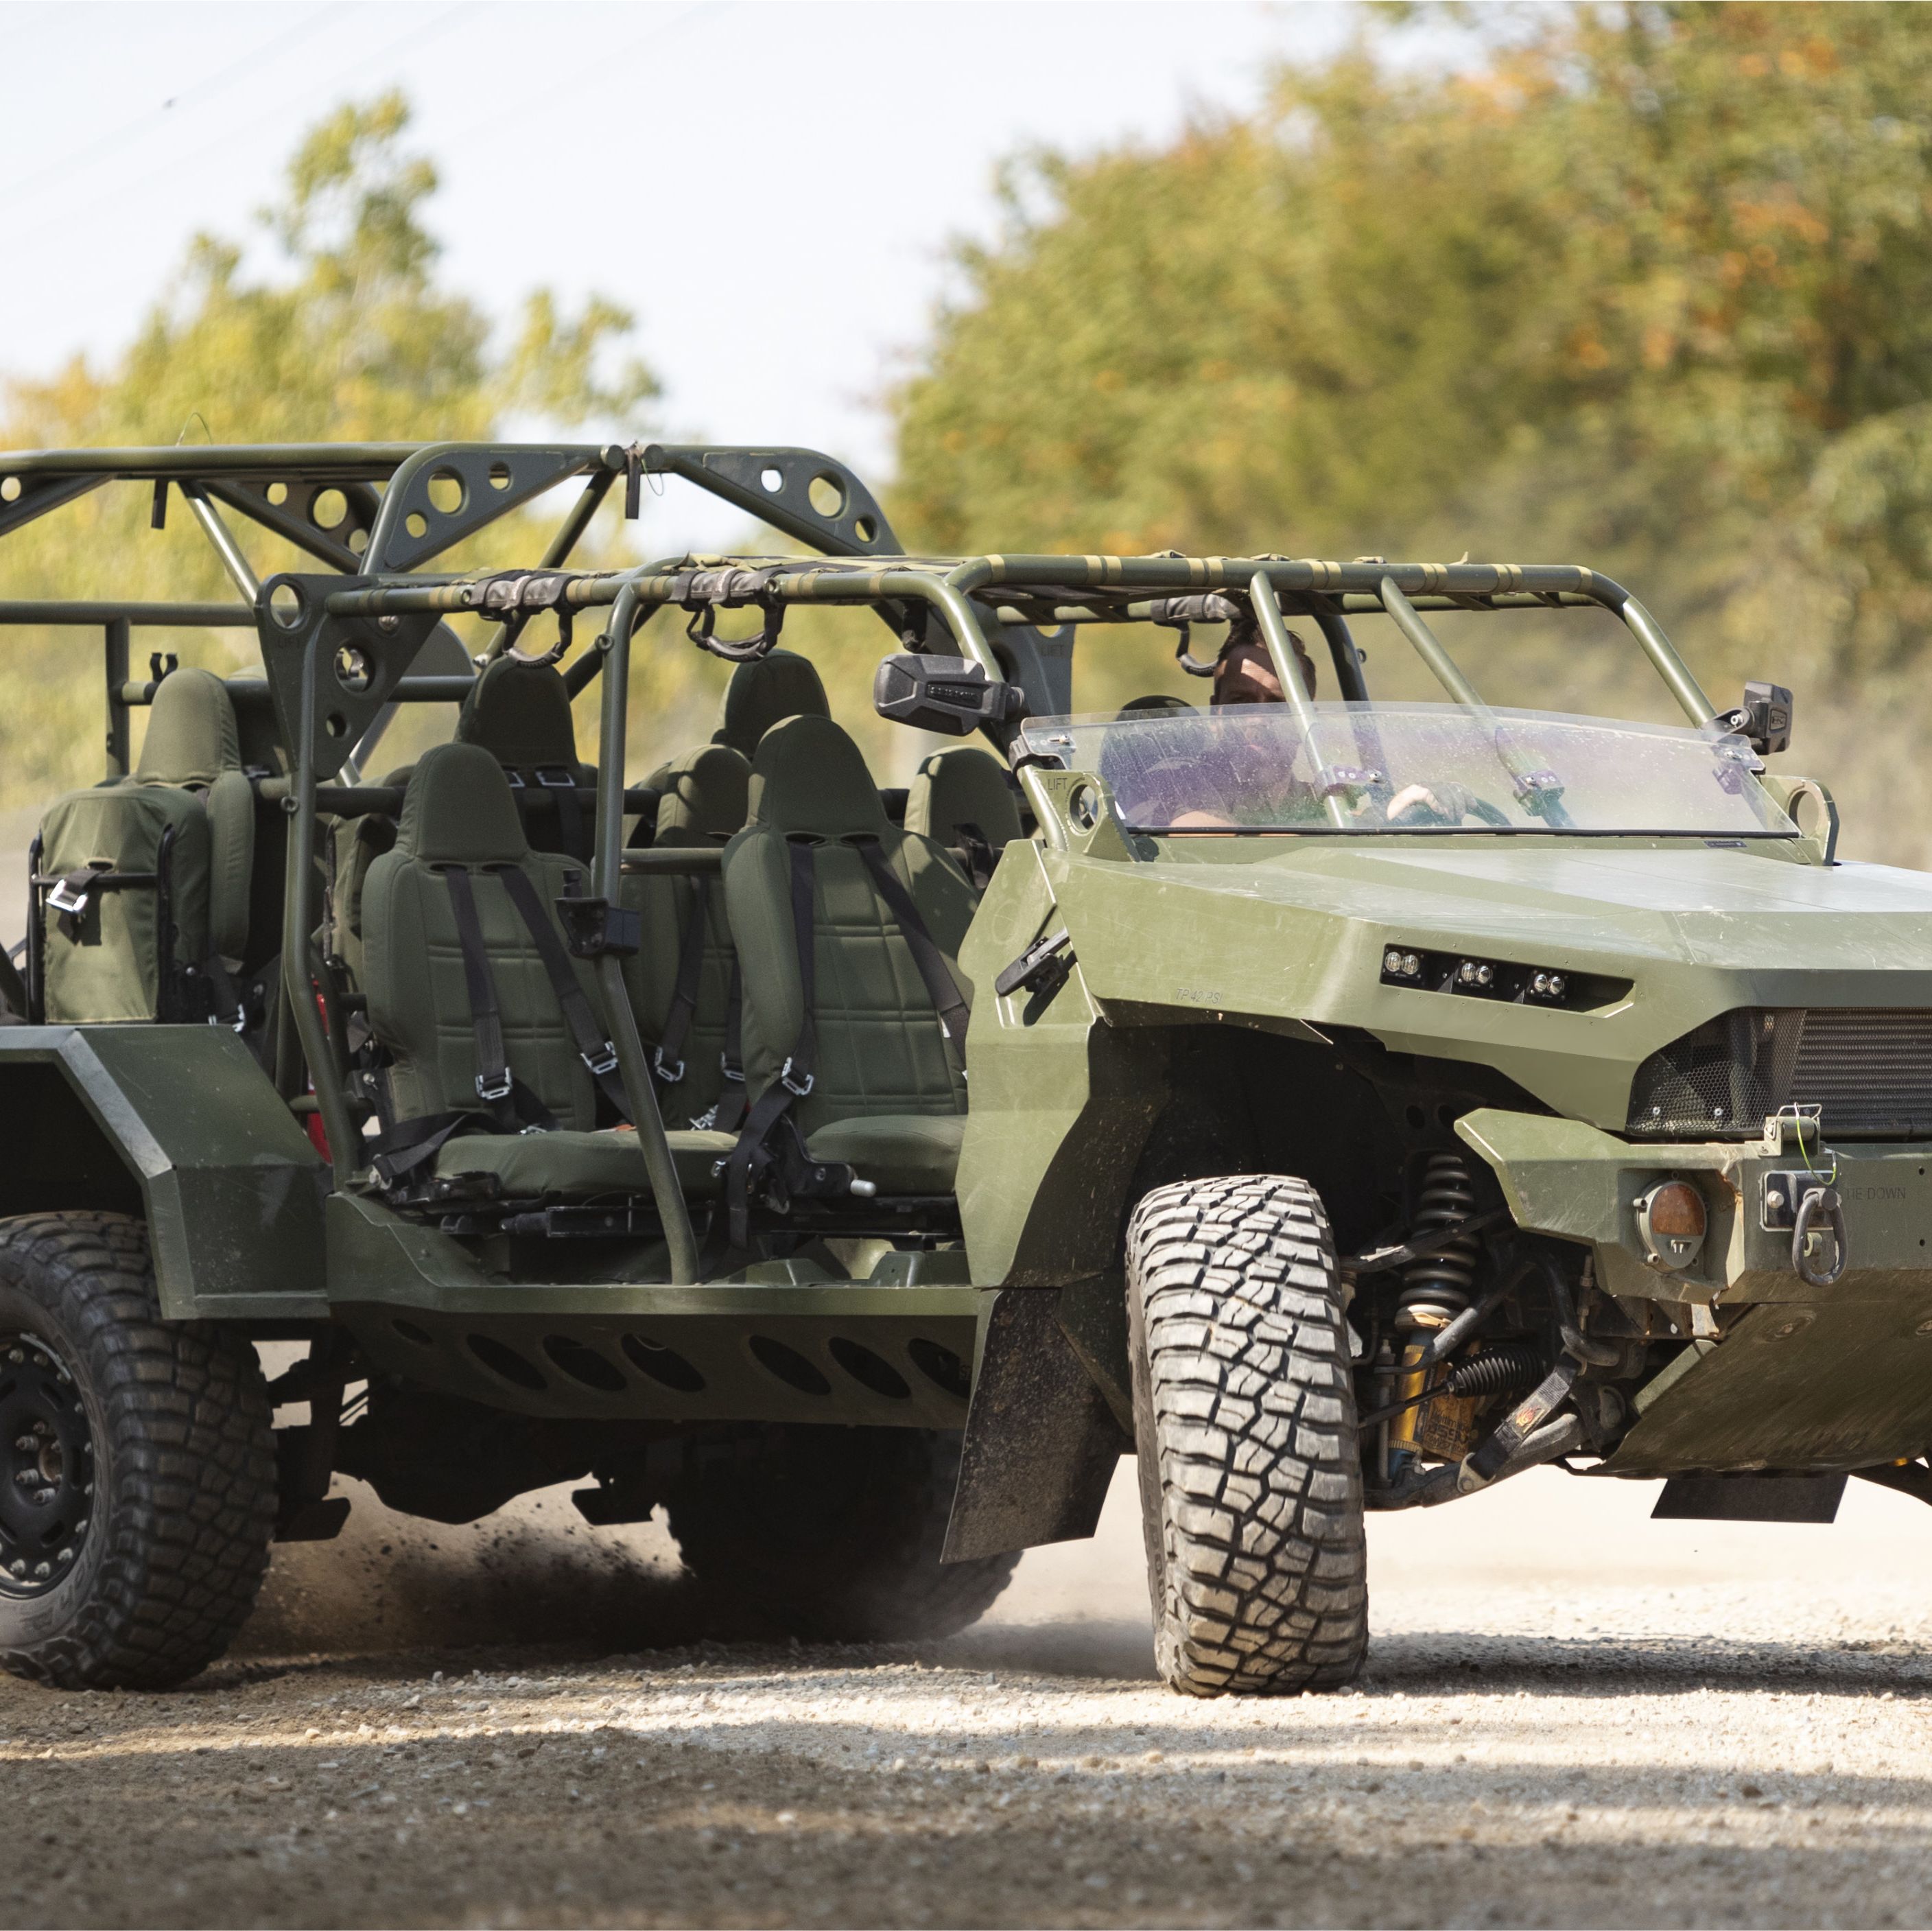 The Pentagon Wants to Electrify Its Military Vehicles—Here's What That Could Look Like